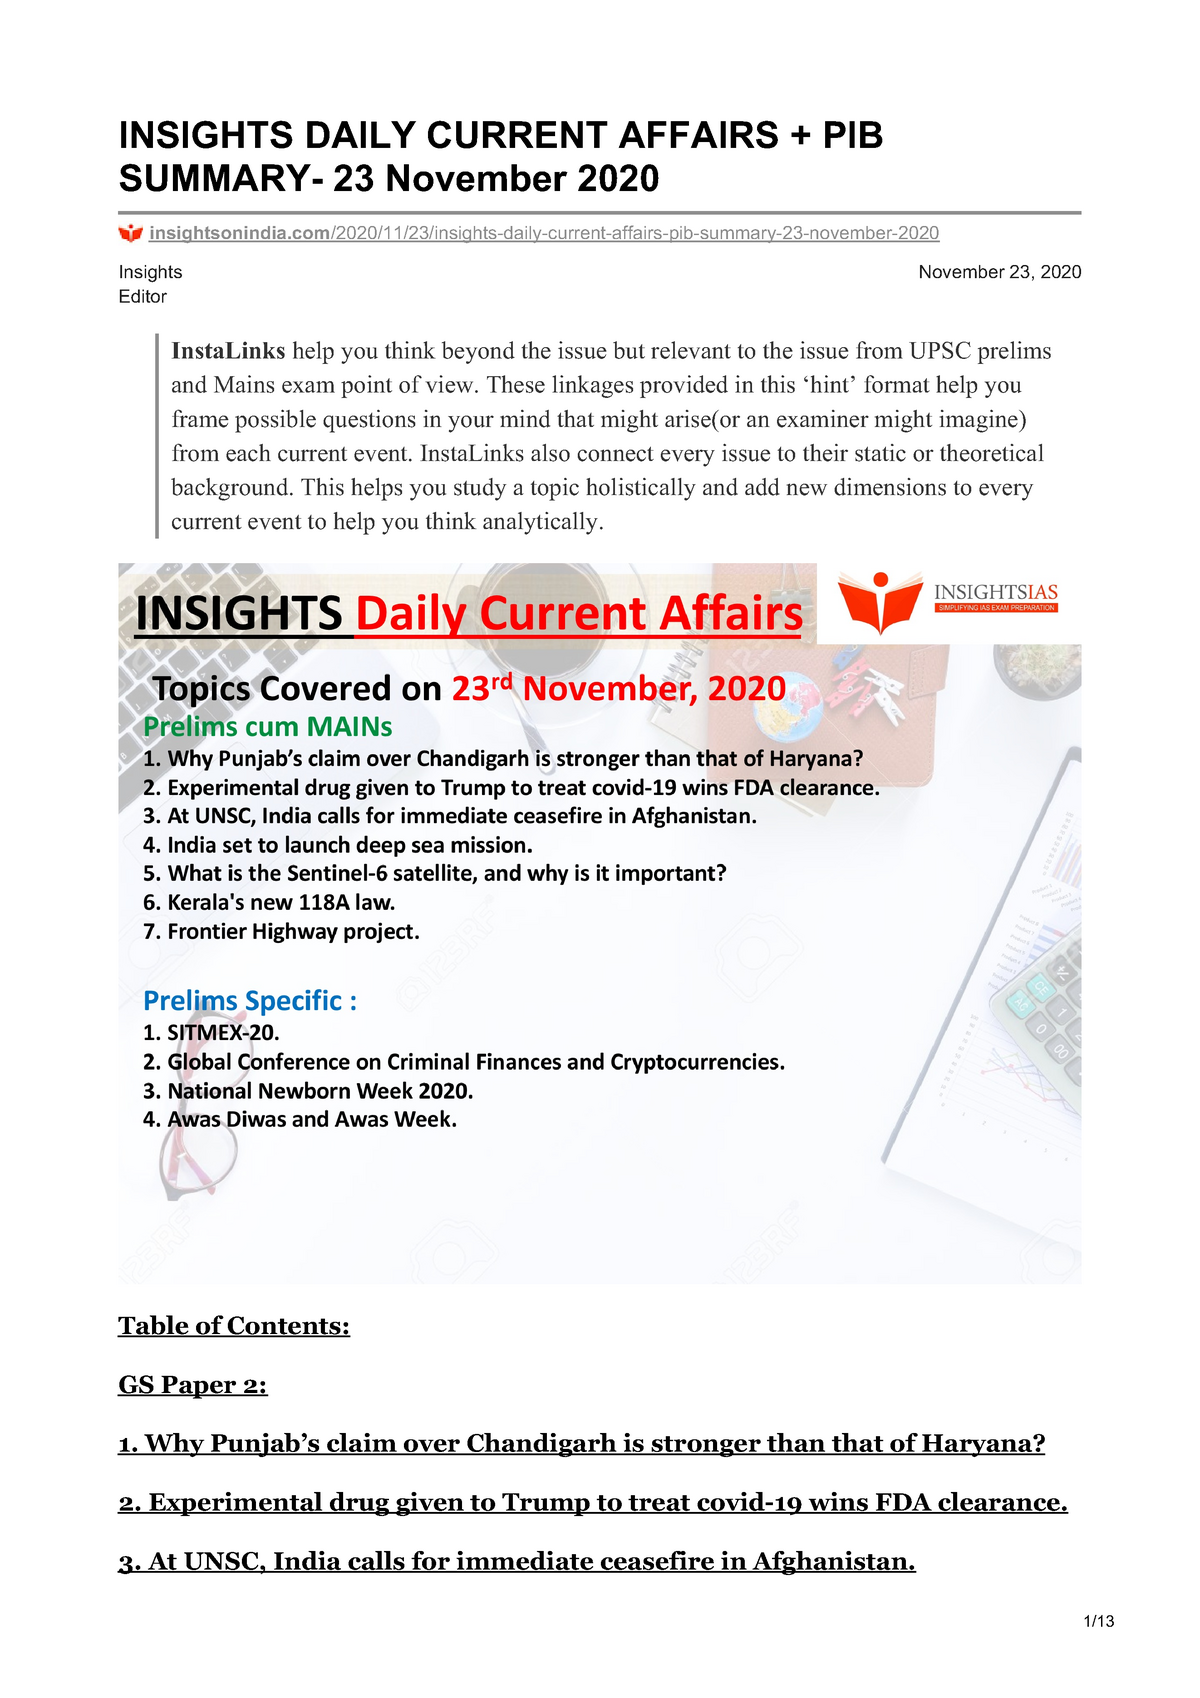 Insights Daily Current Affairs Pib Summary 23 November 2020 Insights 9331